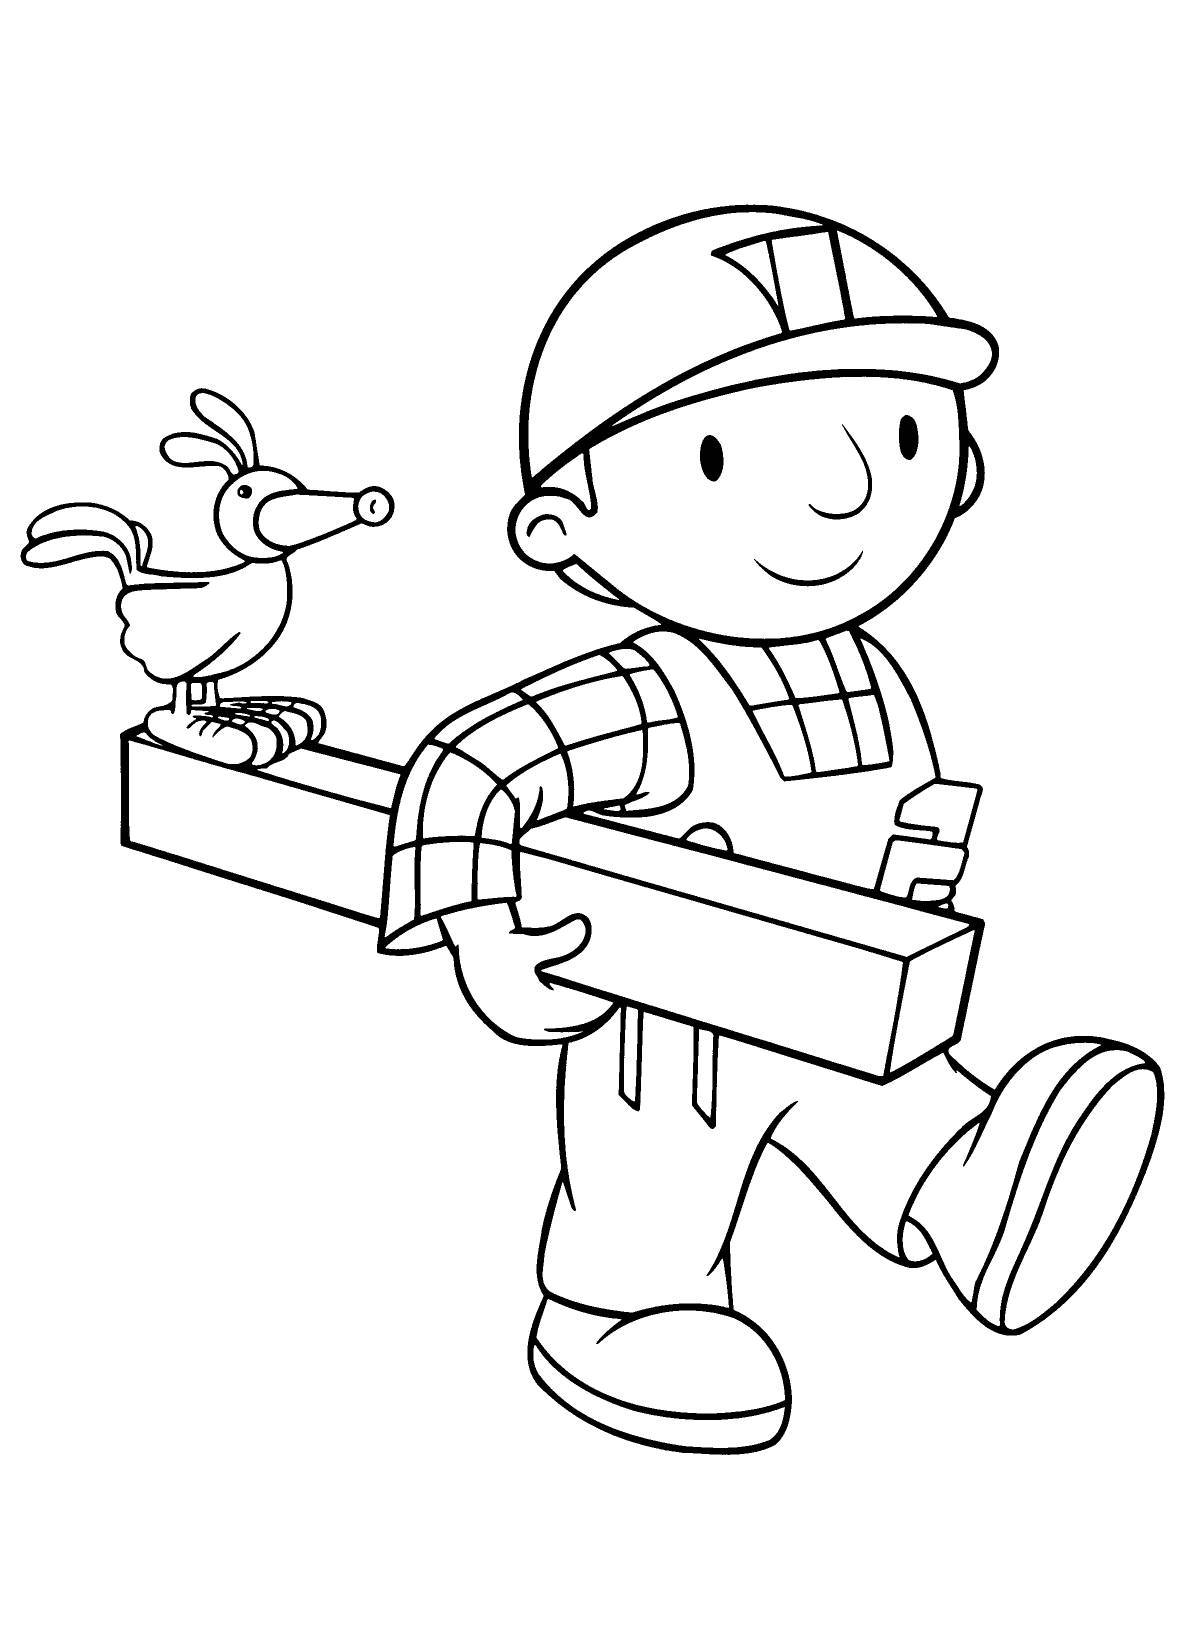 Fun coloring page maker